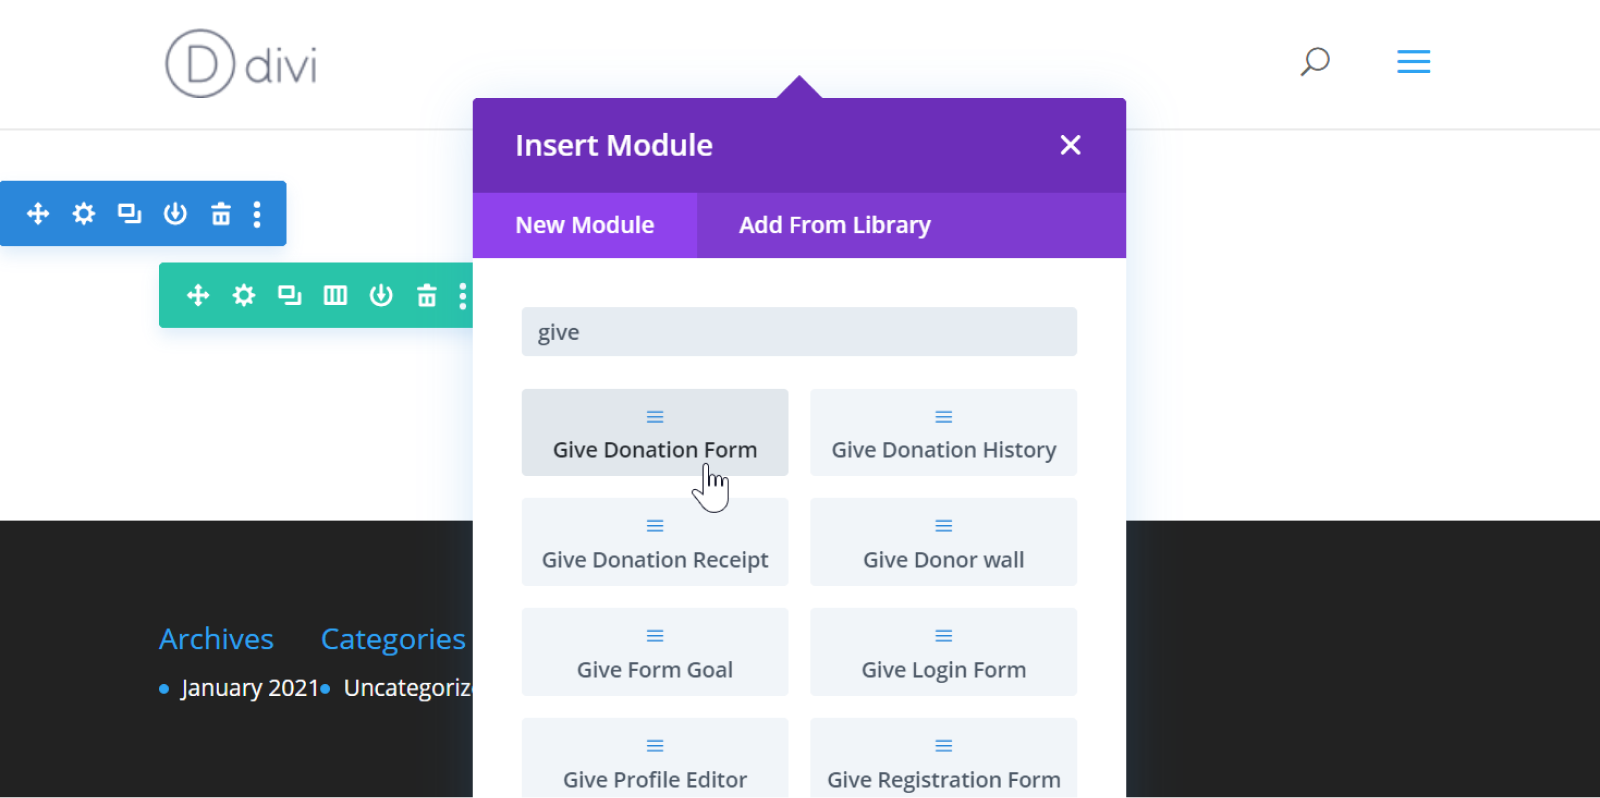 Divi Modules for GiveWP include donation form, donation history, donation receipt, donor wall, form goal, login form, profile editor, and registration form.